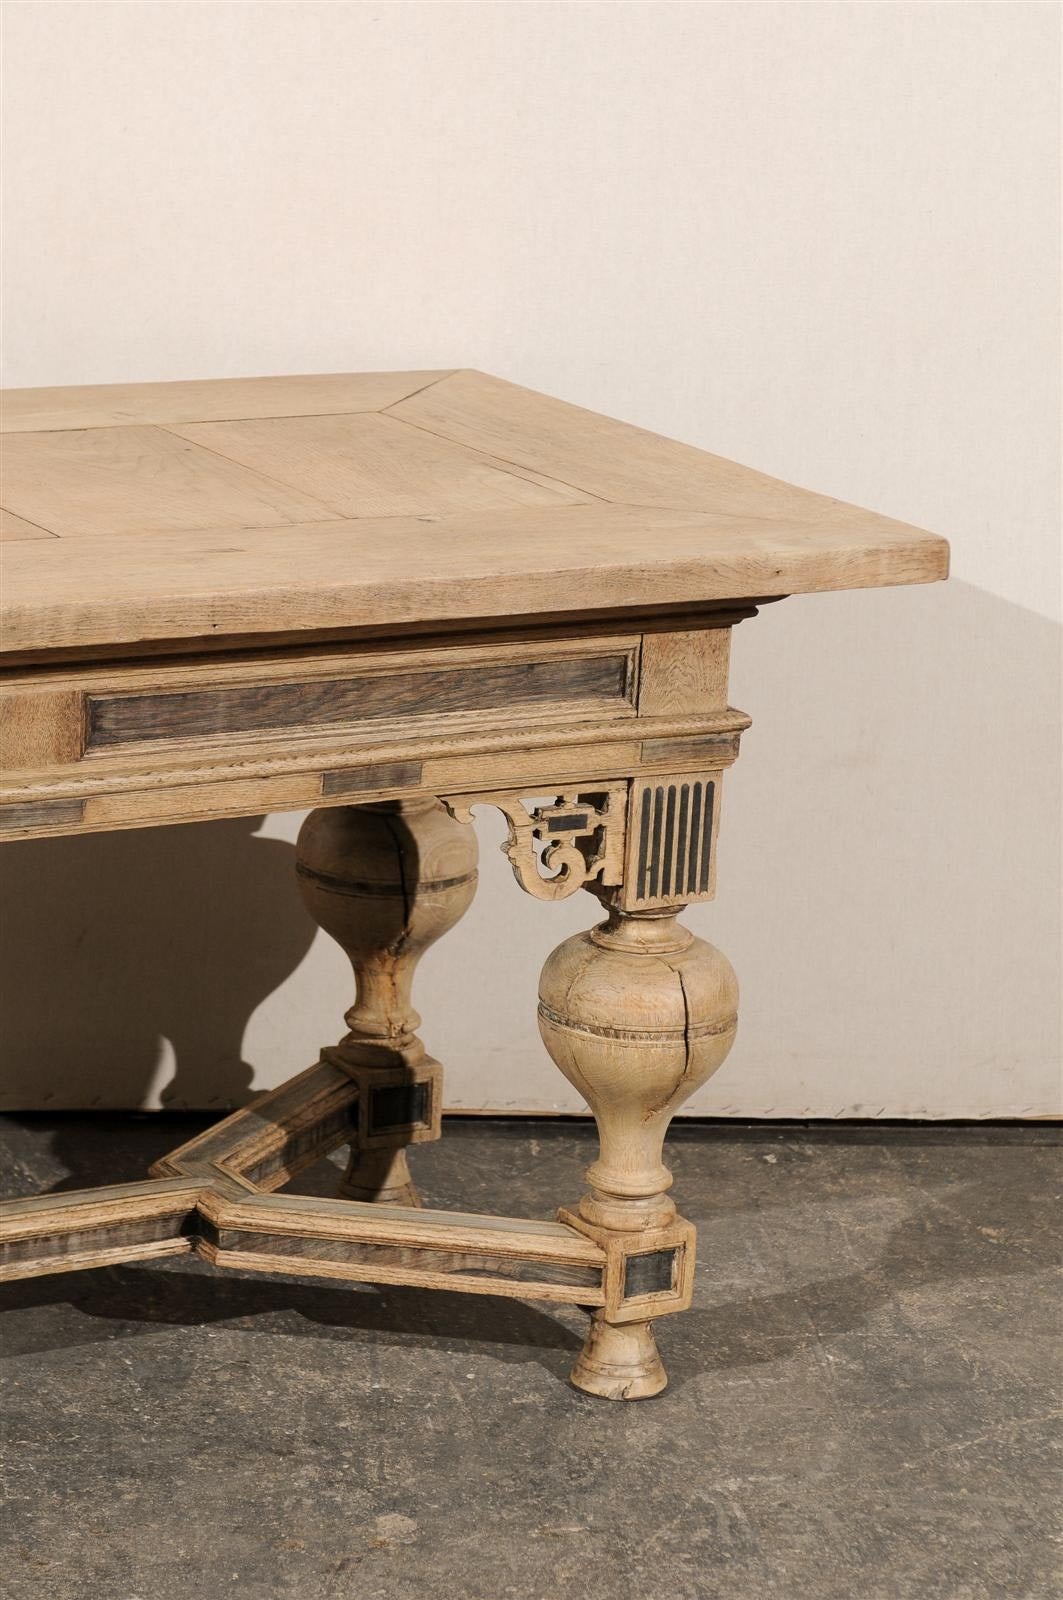 Hand-Carved A Very Handsome, Early 19th C. Swedish Baroque Style Bleached Wood Table or Desk